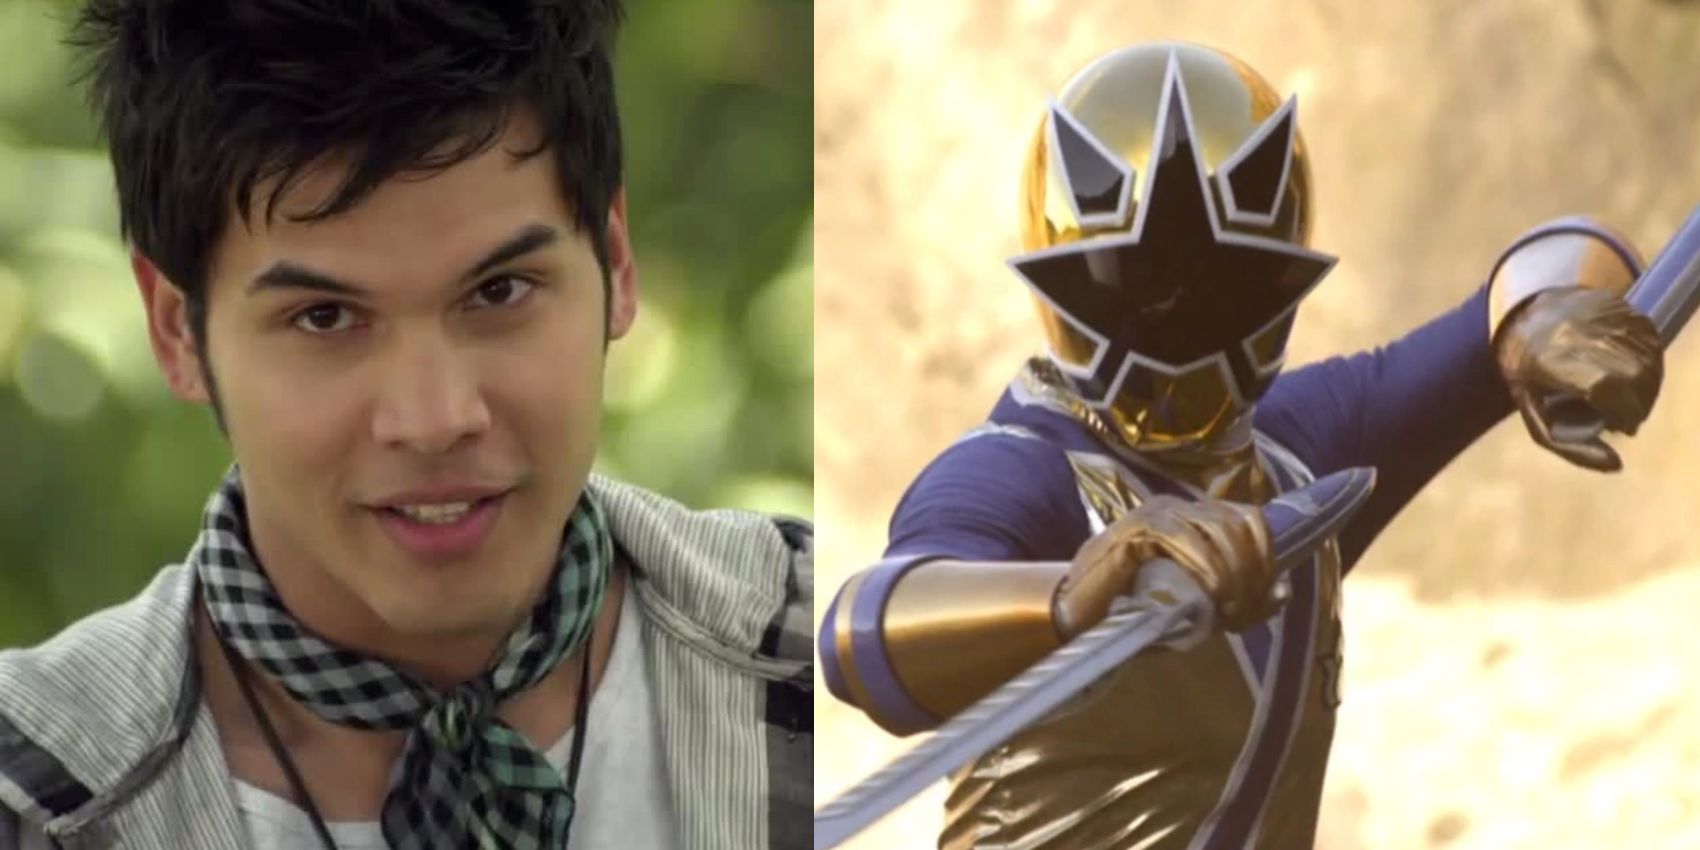 Power Rangers Every Special Sixth Ranger Ranked Worst To Best.